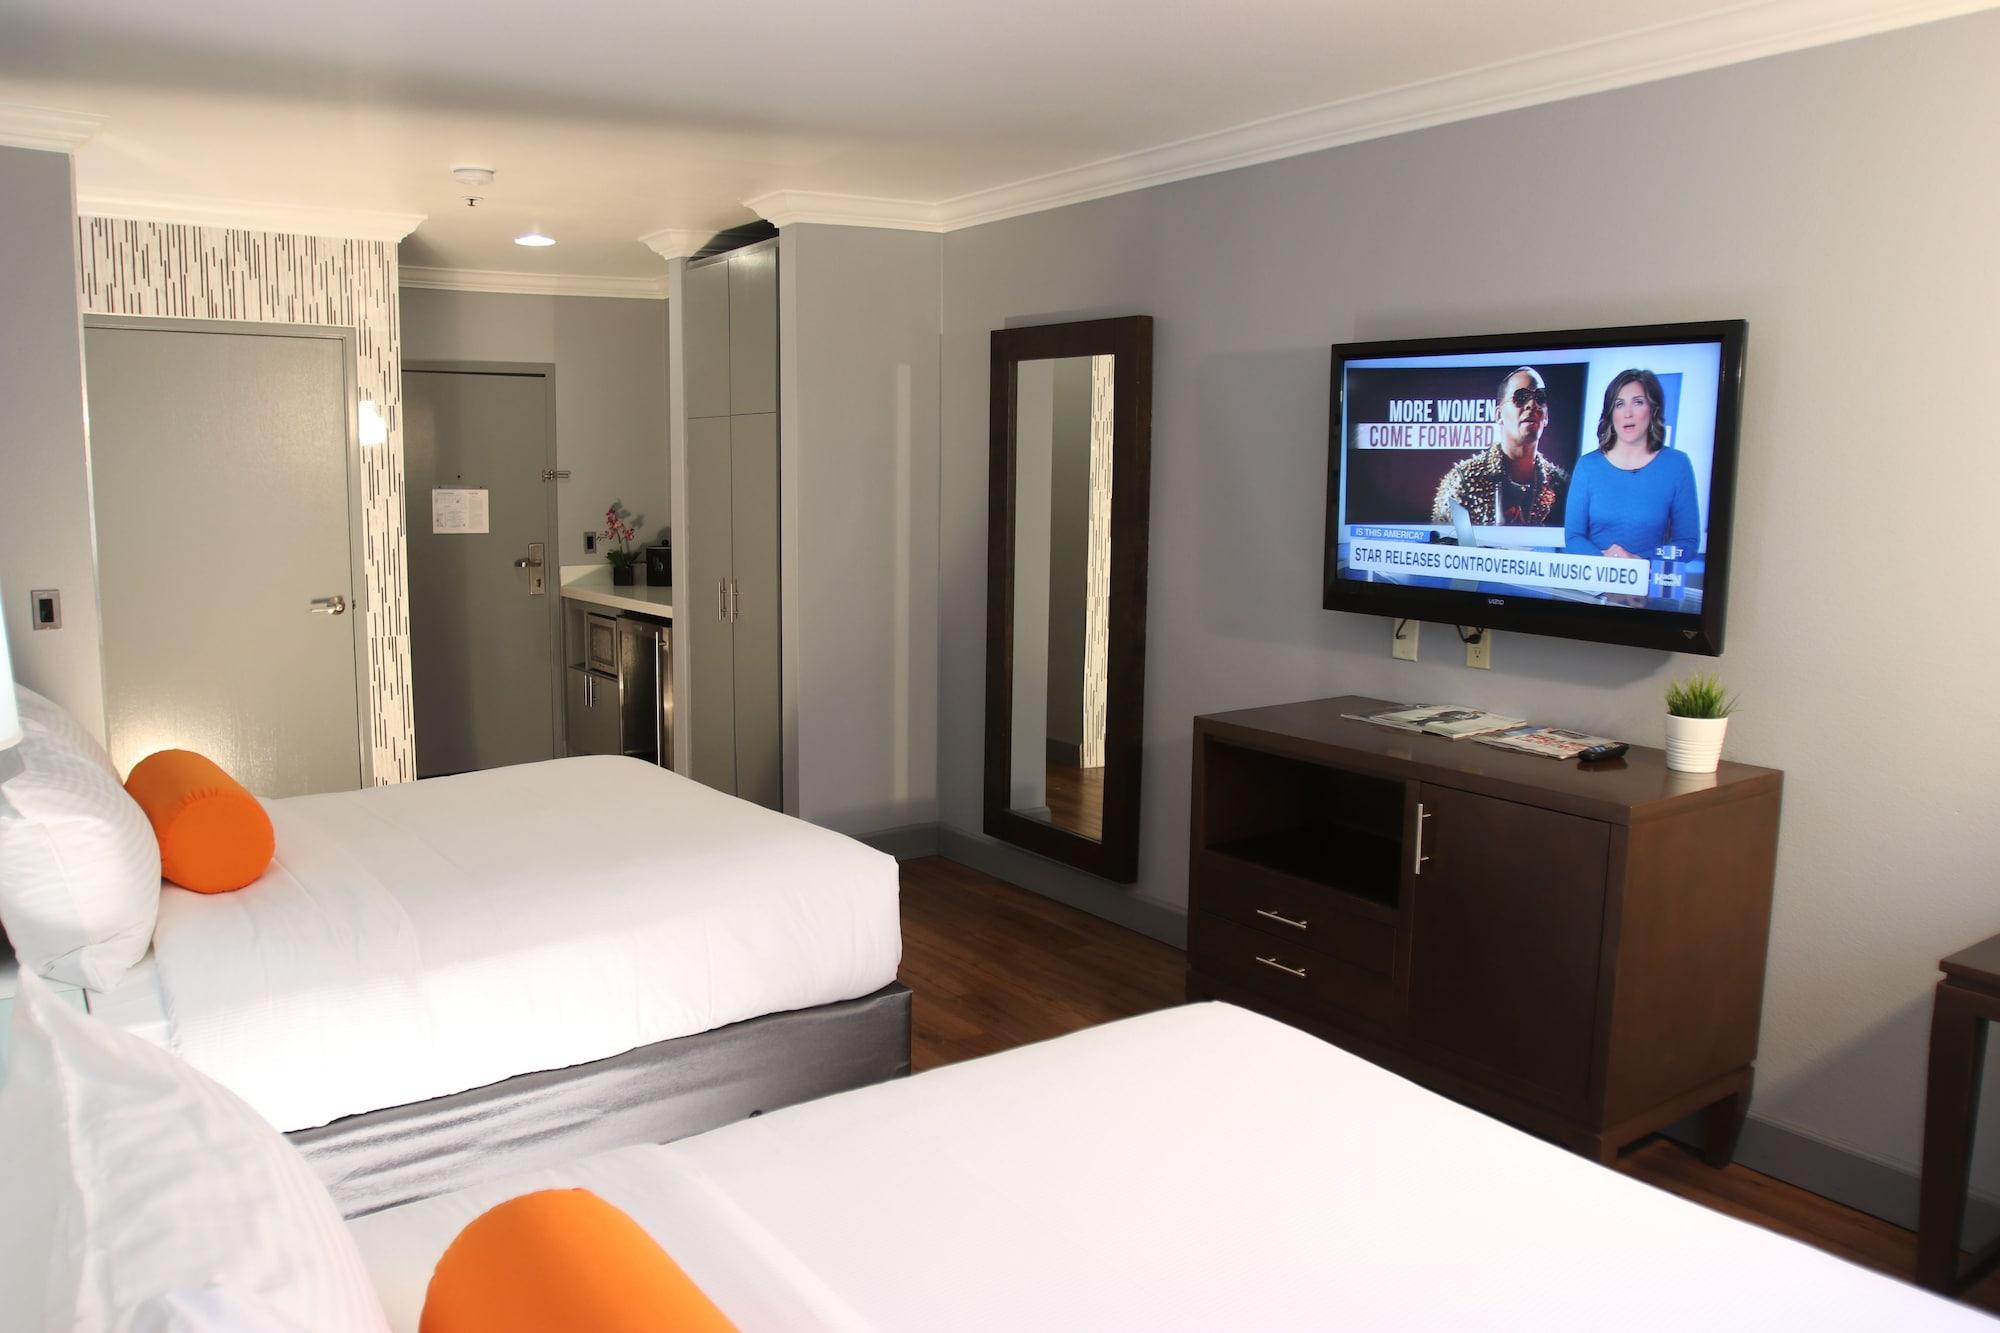 Blvd Hotel & Suites - Walking Distance To Hollywood Walk Of Fame (Adults Only) Los Angeles Ngoại thất bức ảnh